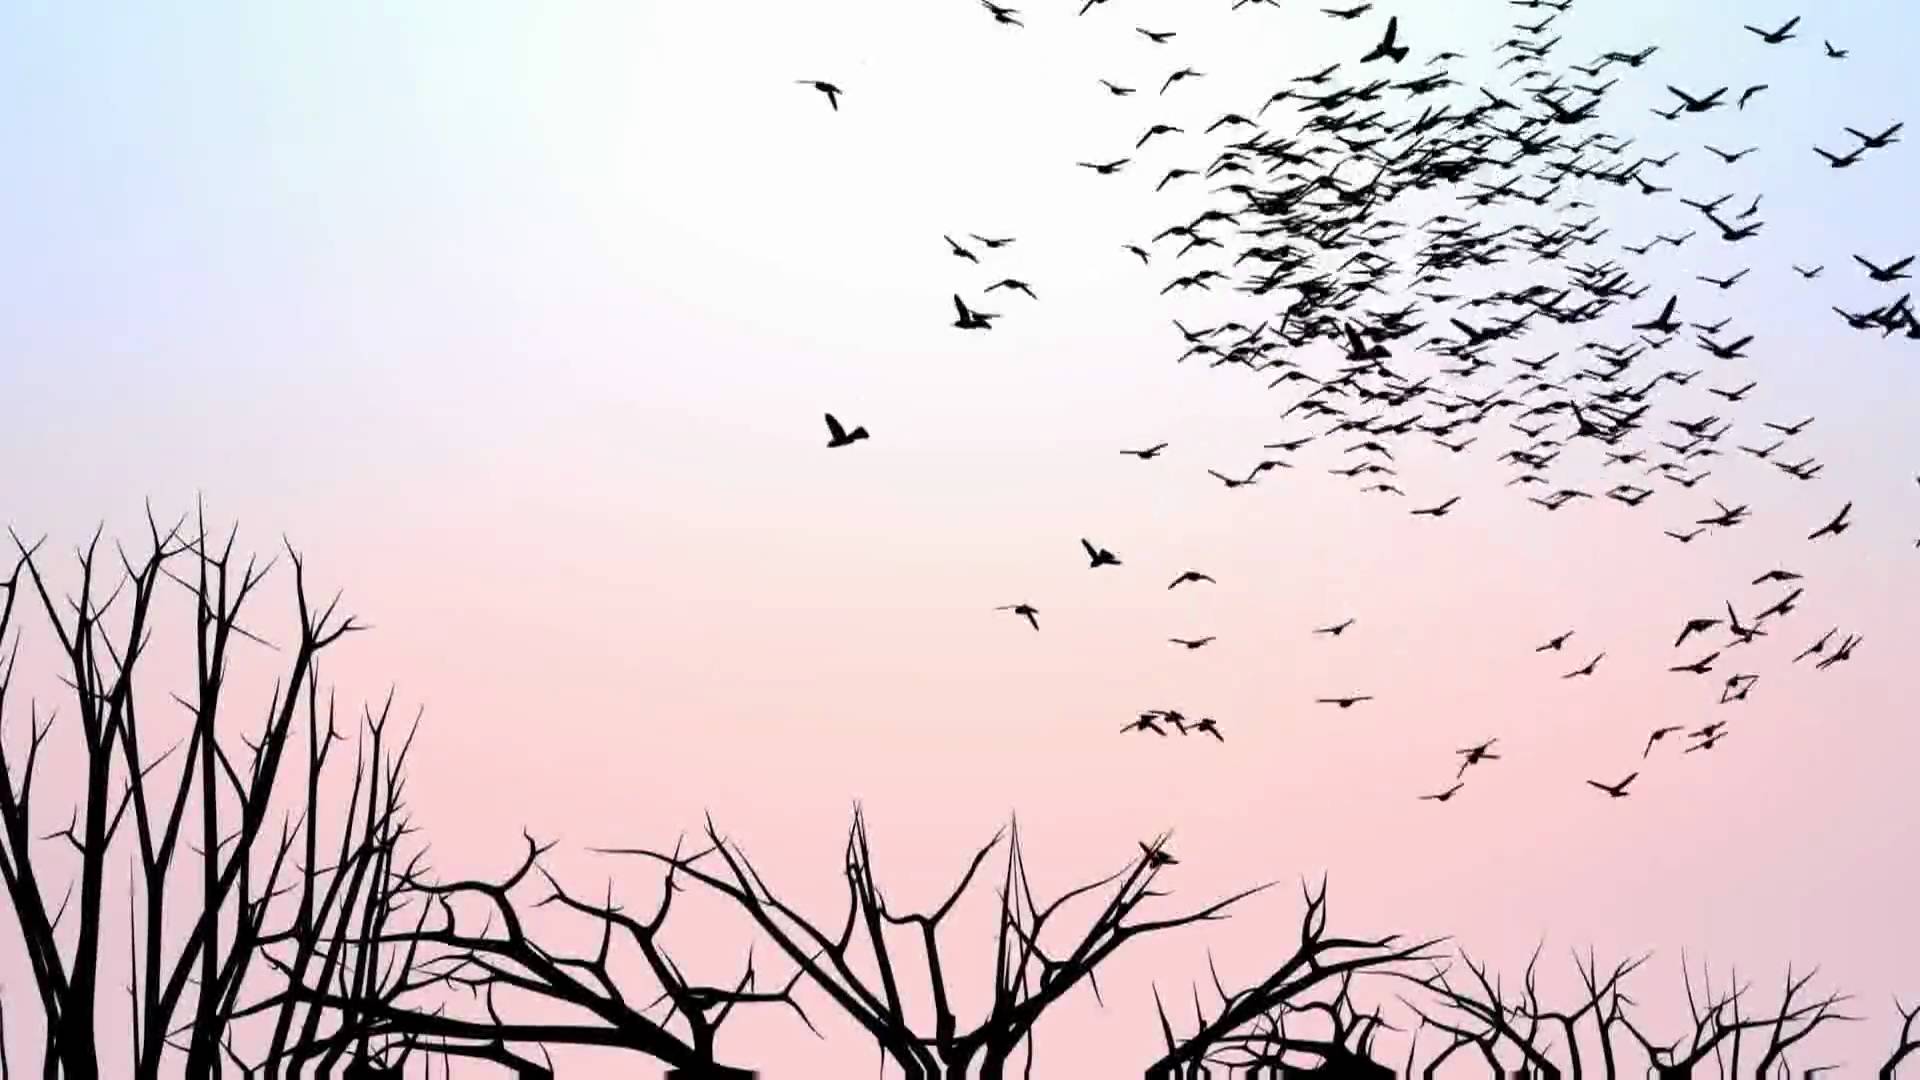 A Flock of Birds at Sunset - YouTube